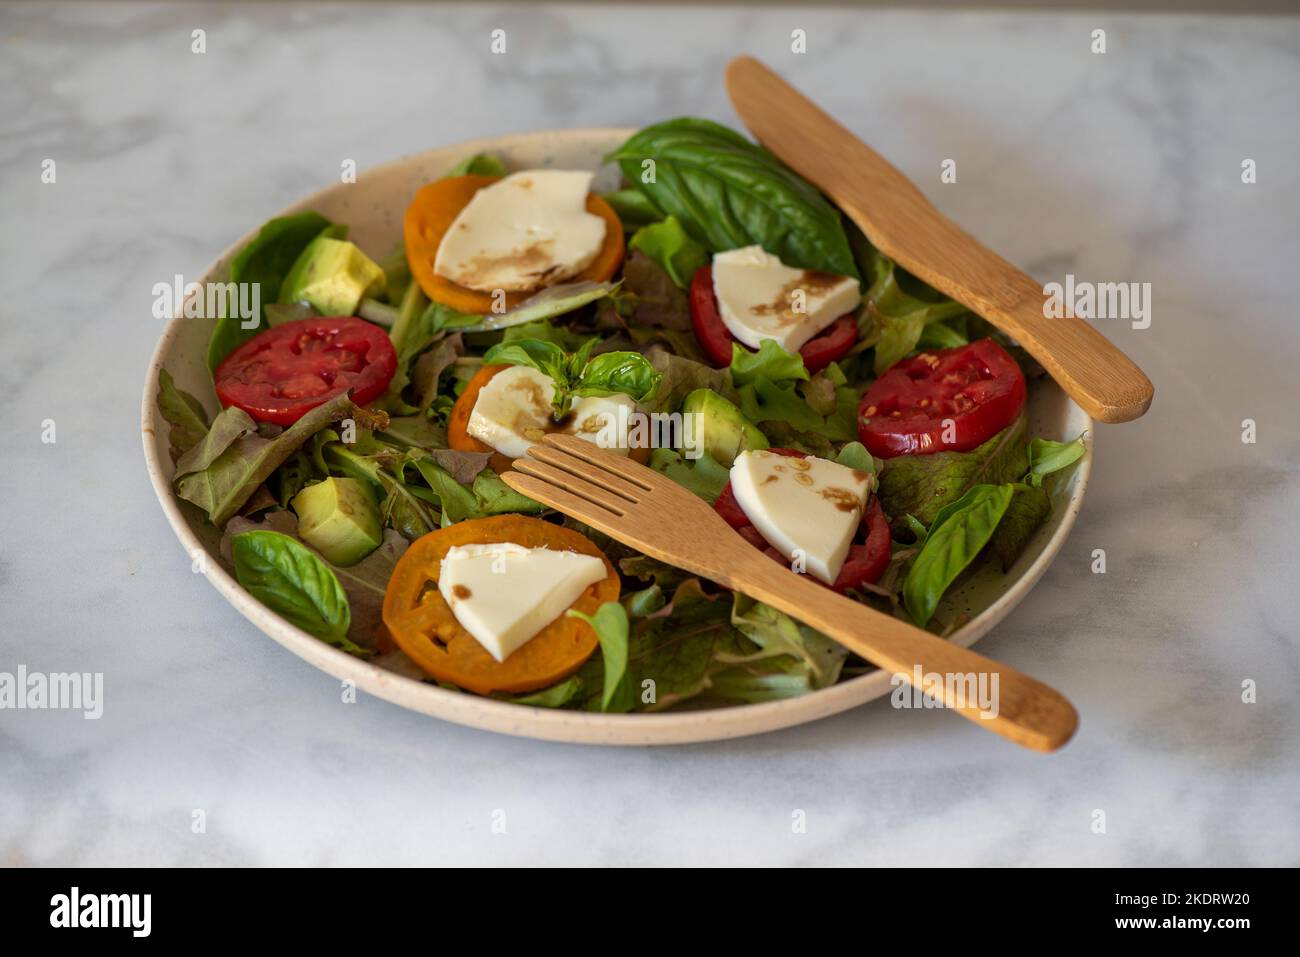 Organic mixed greens, tomatoes, avocado and mozzarella salad served with olive oil and balsamic vinegar in bamboo plate and silverware, on marble tabl Stock Photo